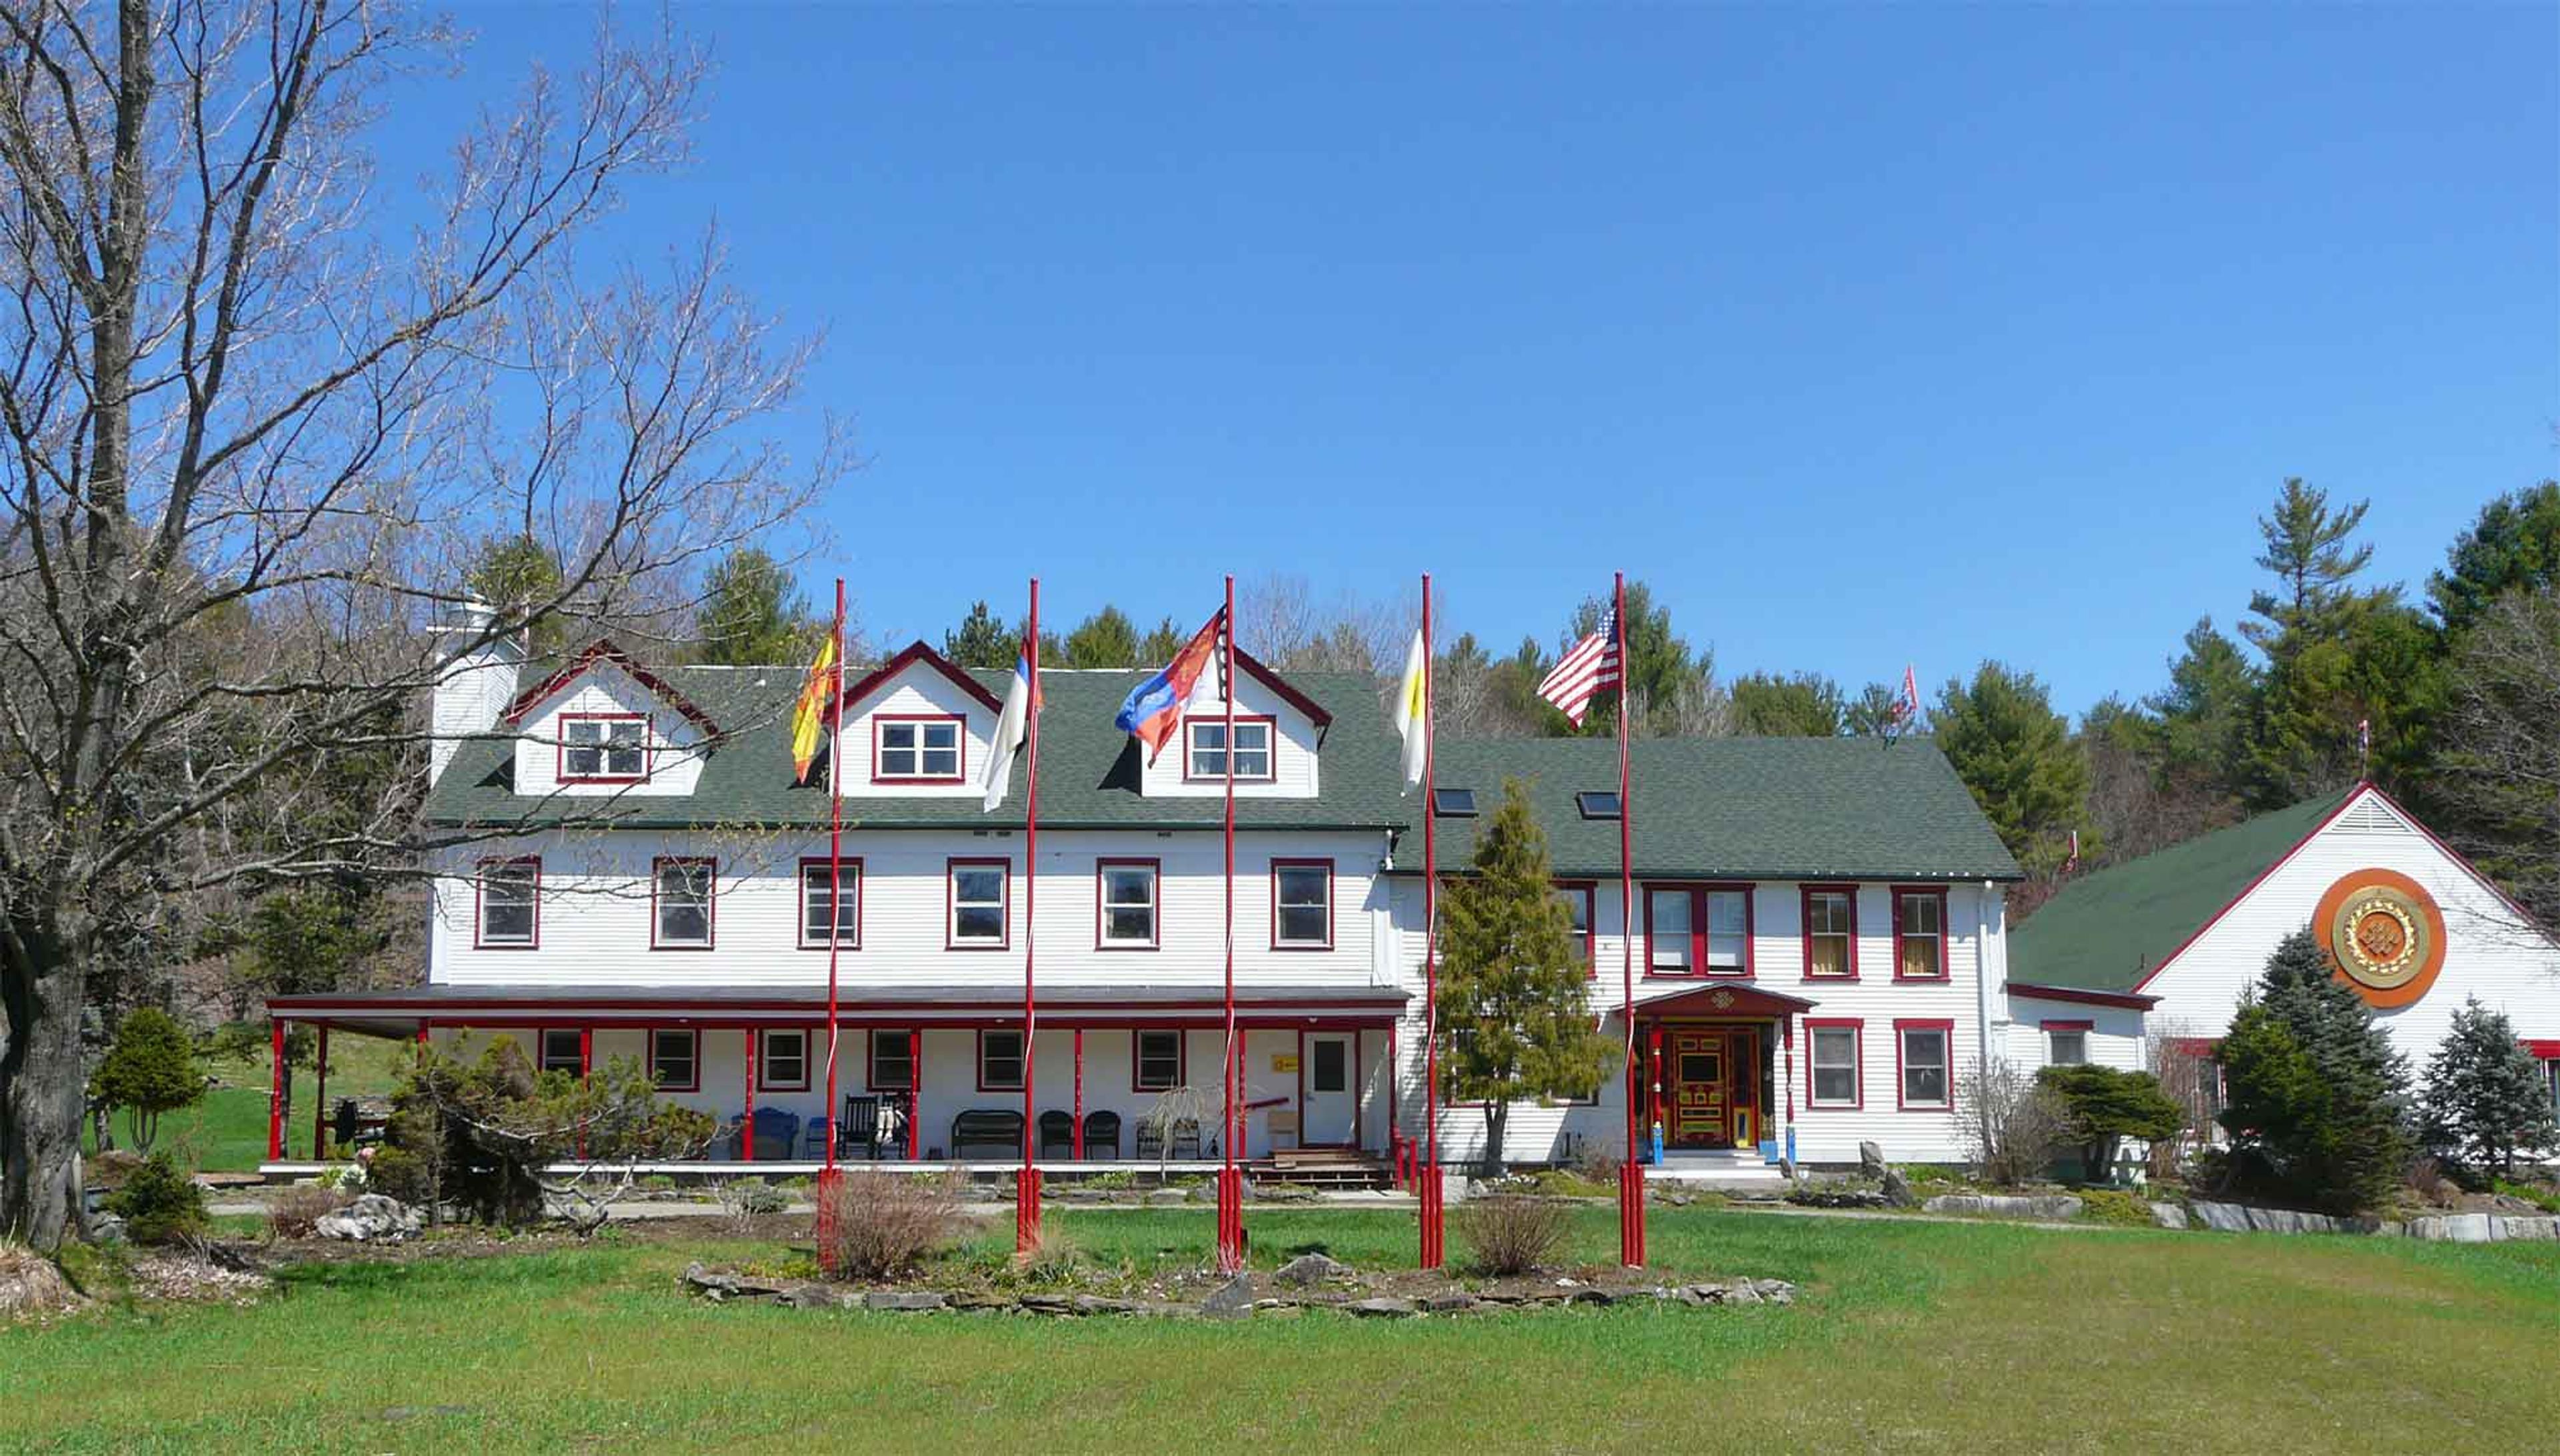 Visit us at Karmê Chöling in Barnet, Vermont - We are one of the oldest Buddhist meditation retreat centers in the US, located in the idyllic rolling hills of rural Vermont. You are welcomed to stop by for lunch or a day trip.